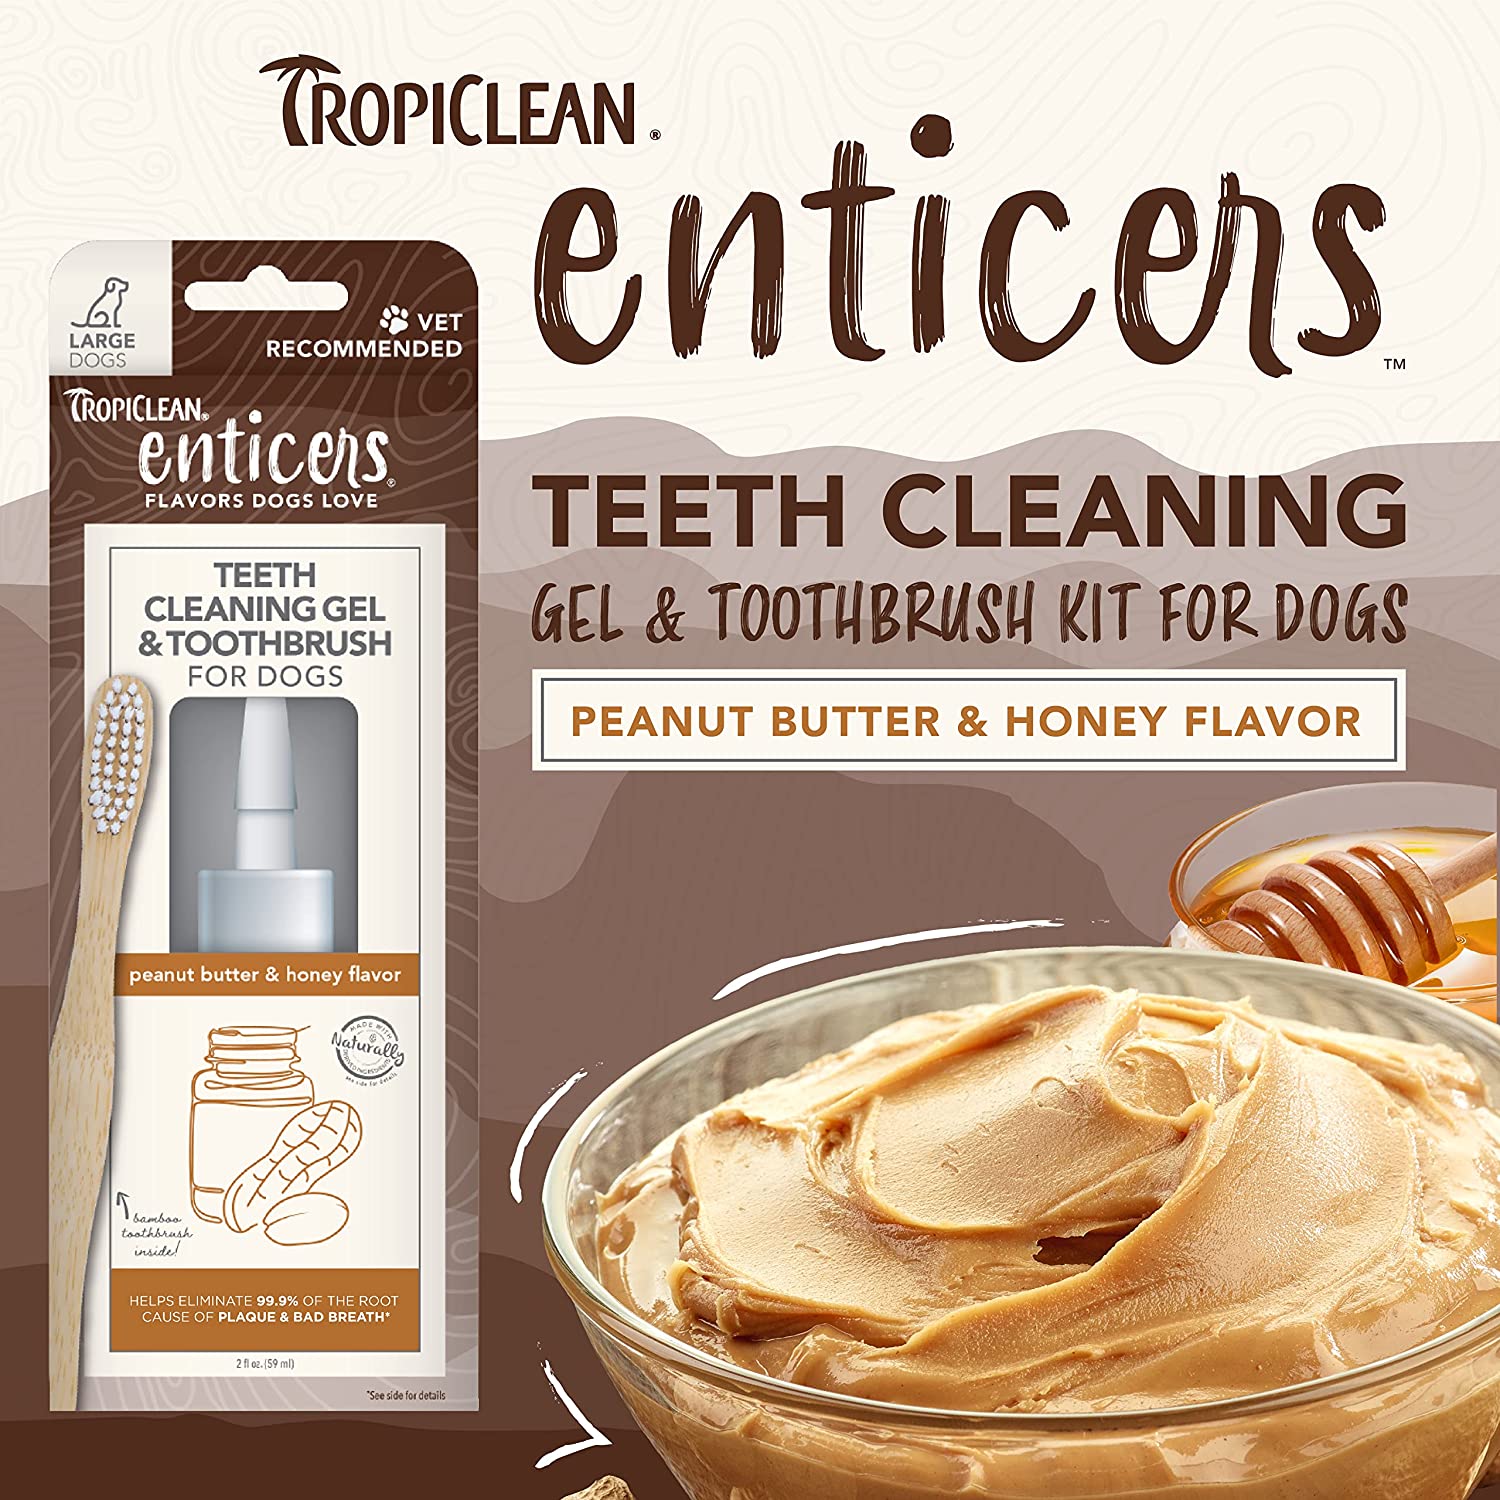 TropiClean Enticers Teeth Cleaning Gel for Dogs - Dental Gel - Helps Fight Plaque & Bad Breath - Flavors Dogs Love - No Brushing Required